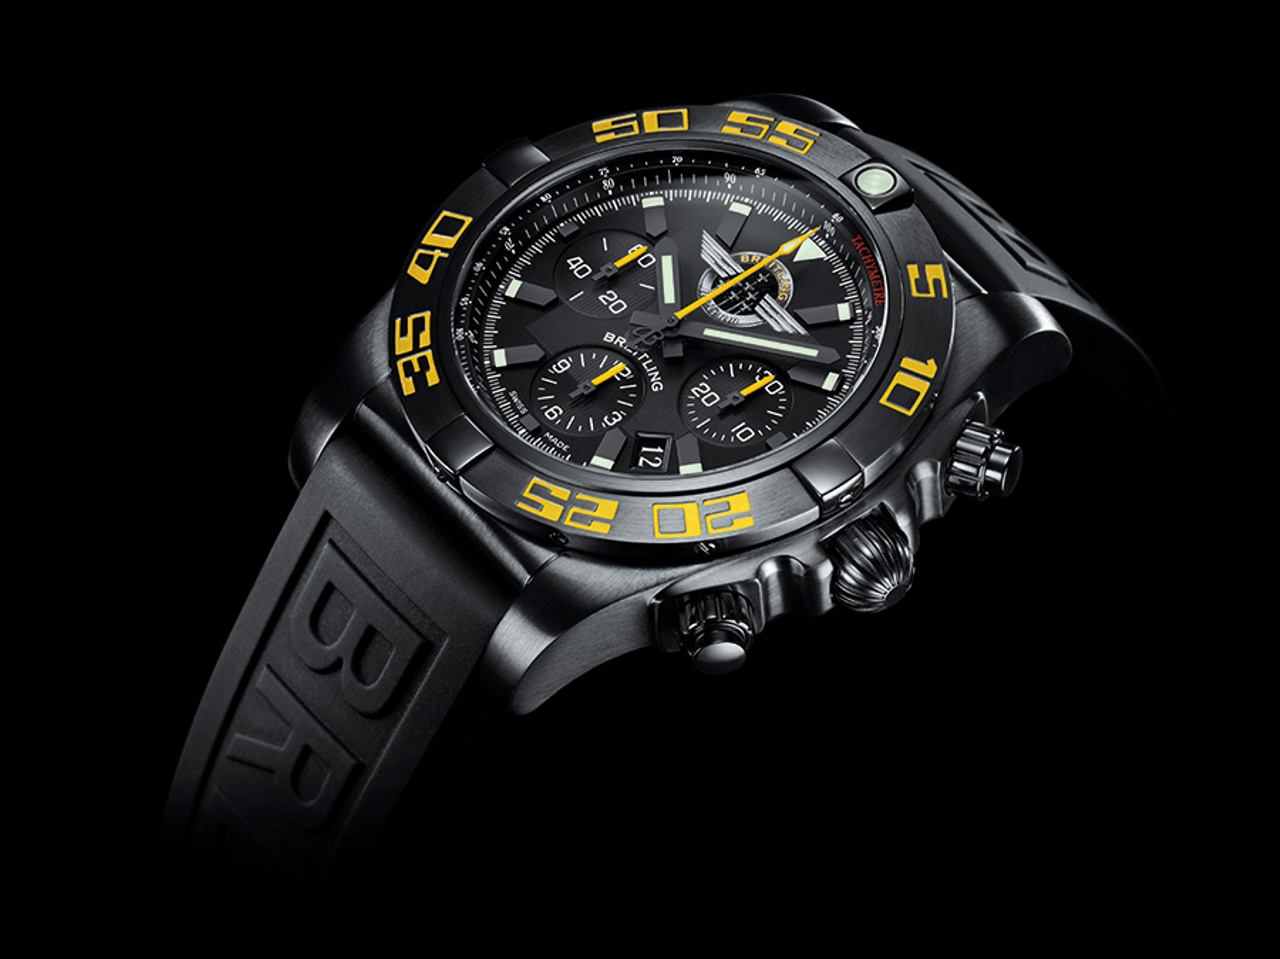 Take A Look At The Breitling Jet Team Chronomat 44mm Replica